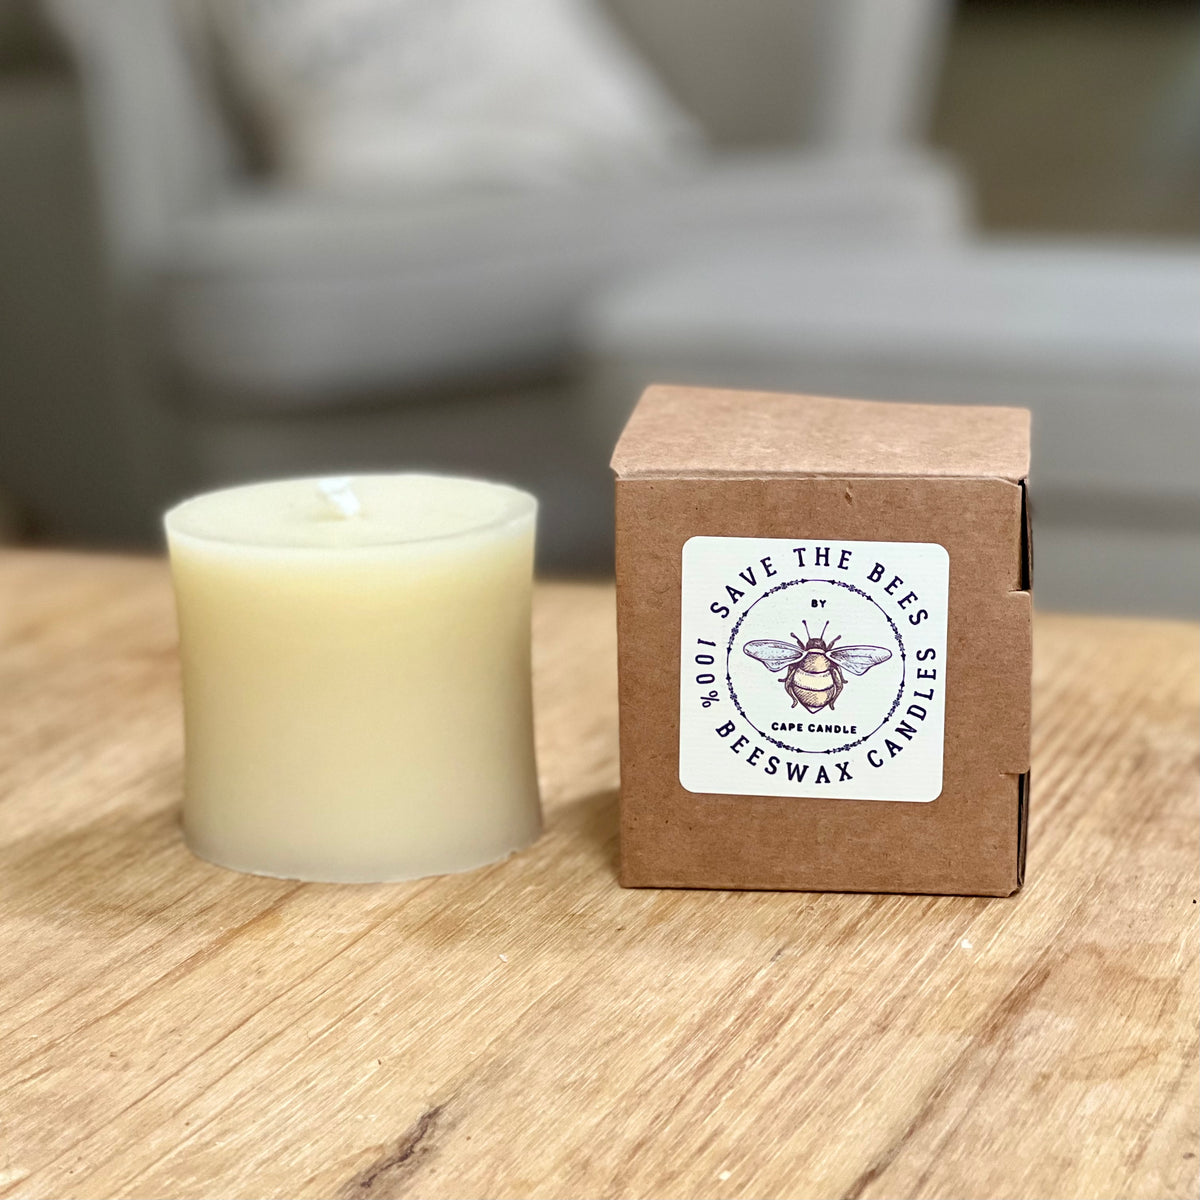 100% Beeswax Ivory 3x4 Pillar Candle Save The Bees By Cape Candle